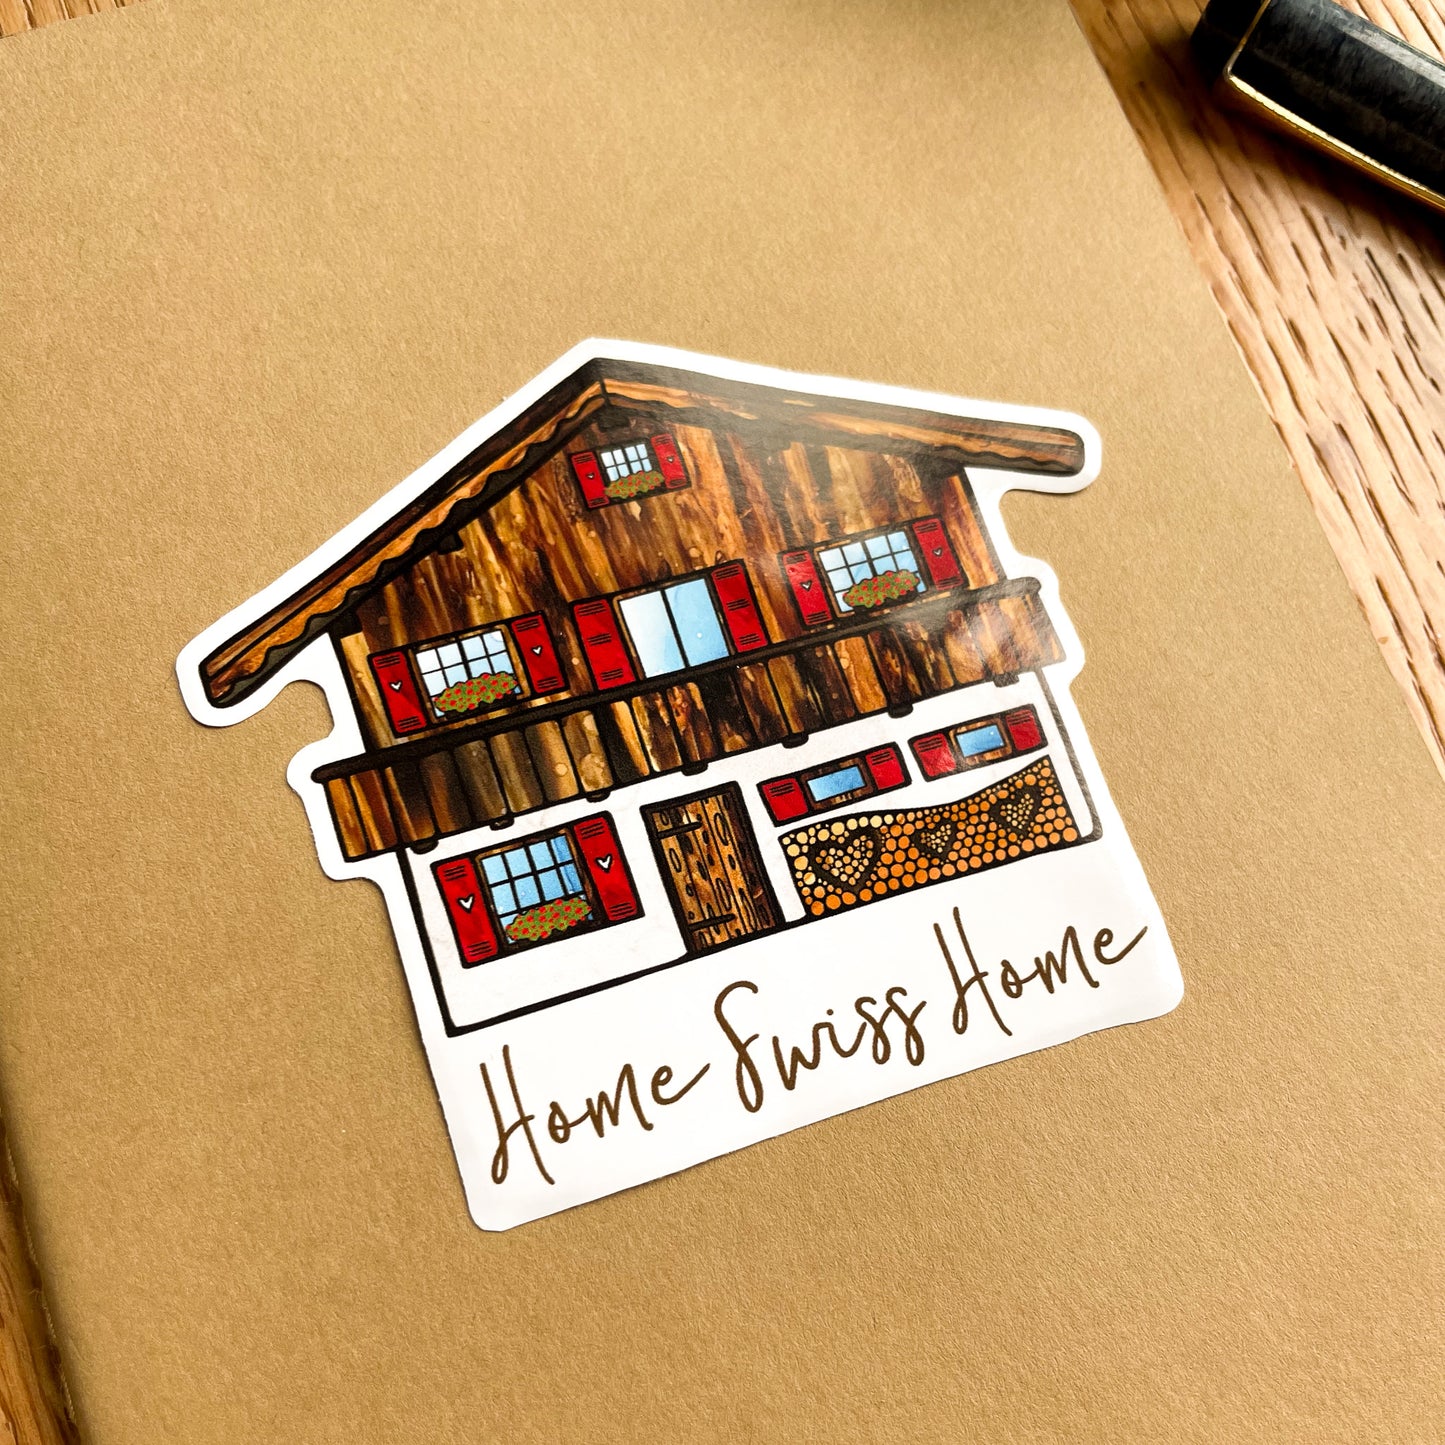 Decorate your belongings with this delightful Swiss Chalet vinyl sticker, bringing the spirit of Switzerland wherever you go.